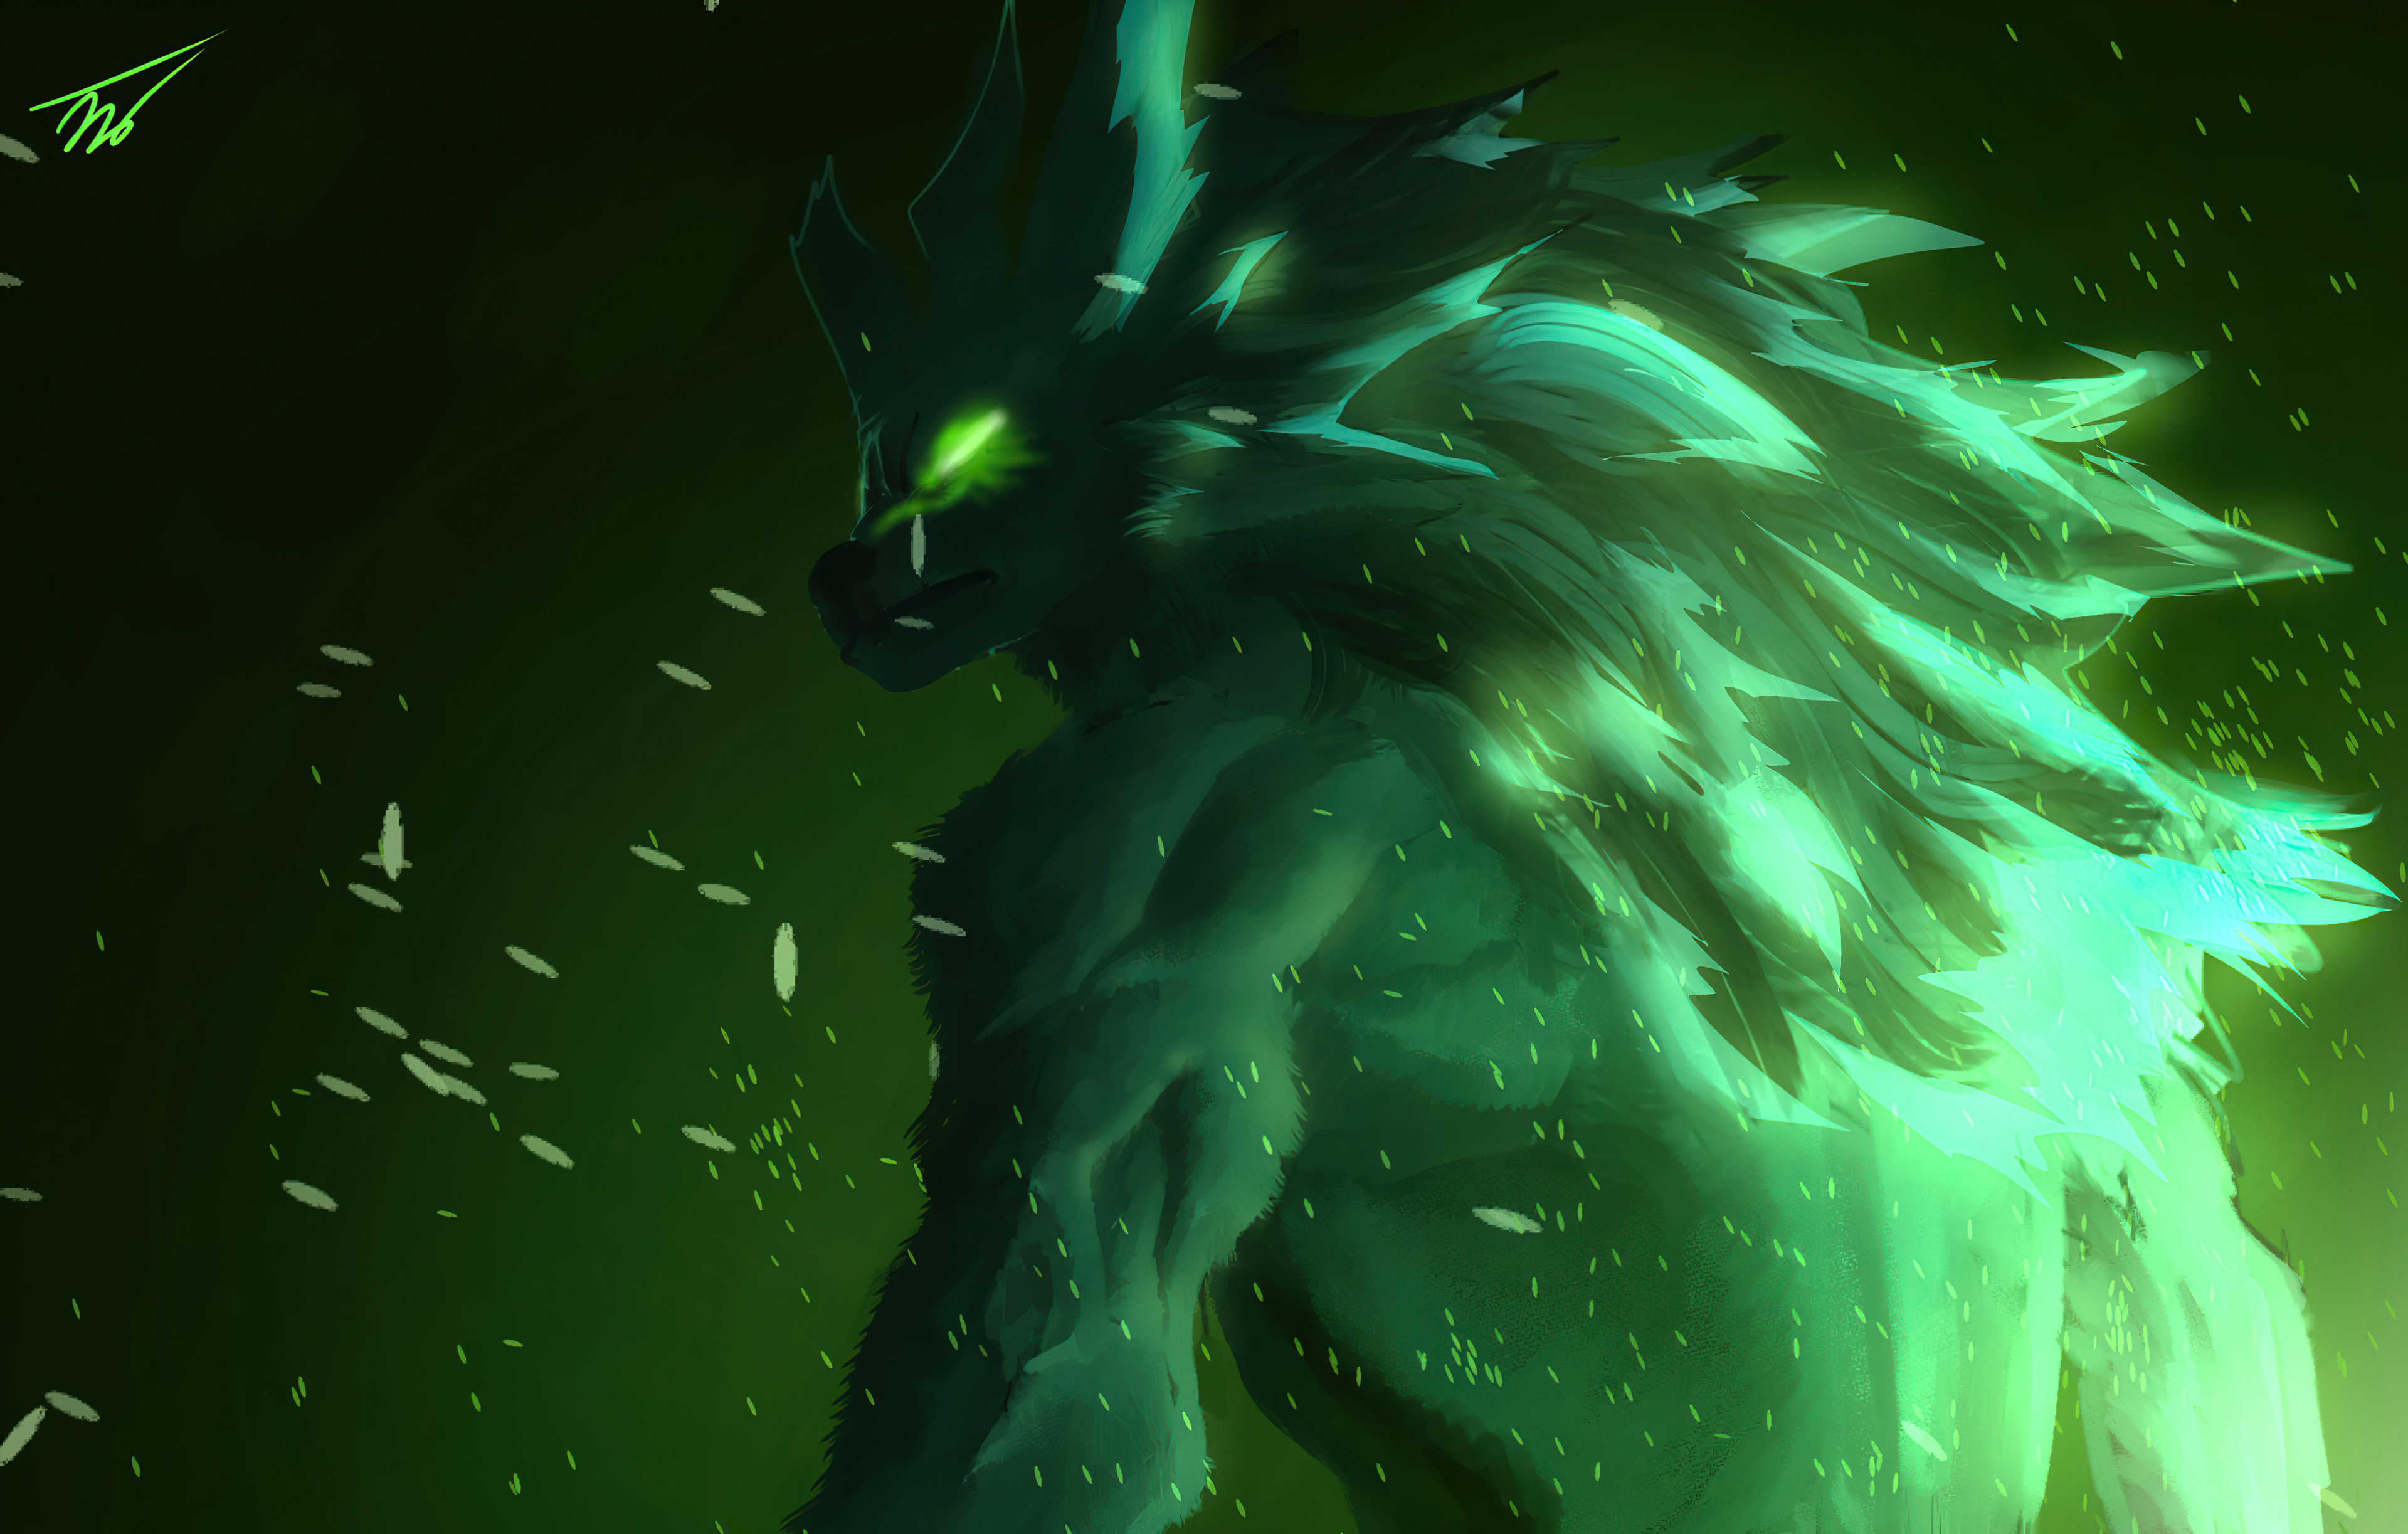 Green werewolf k hd artist k wallpapers images backgrounds photos and pictures